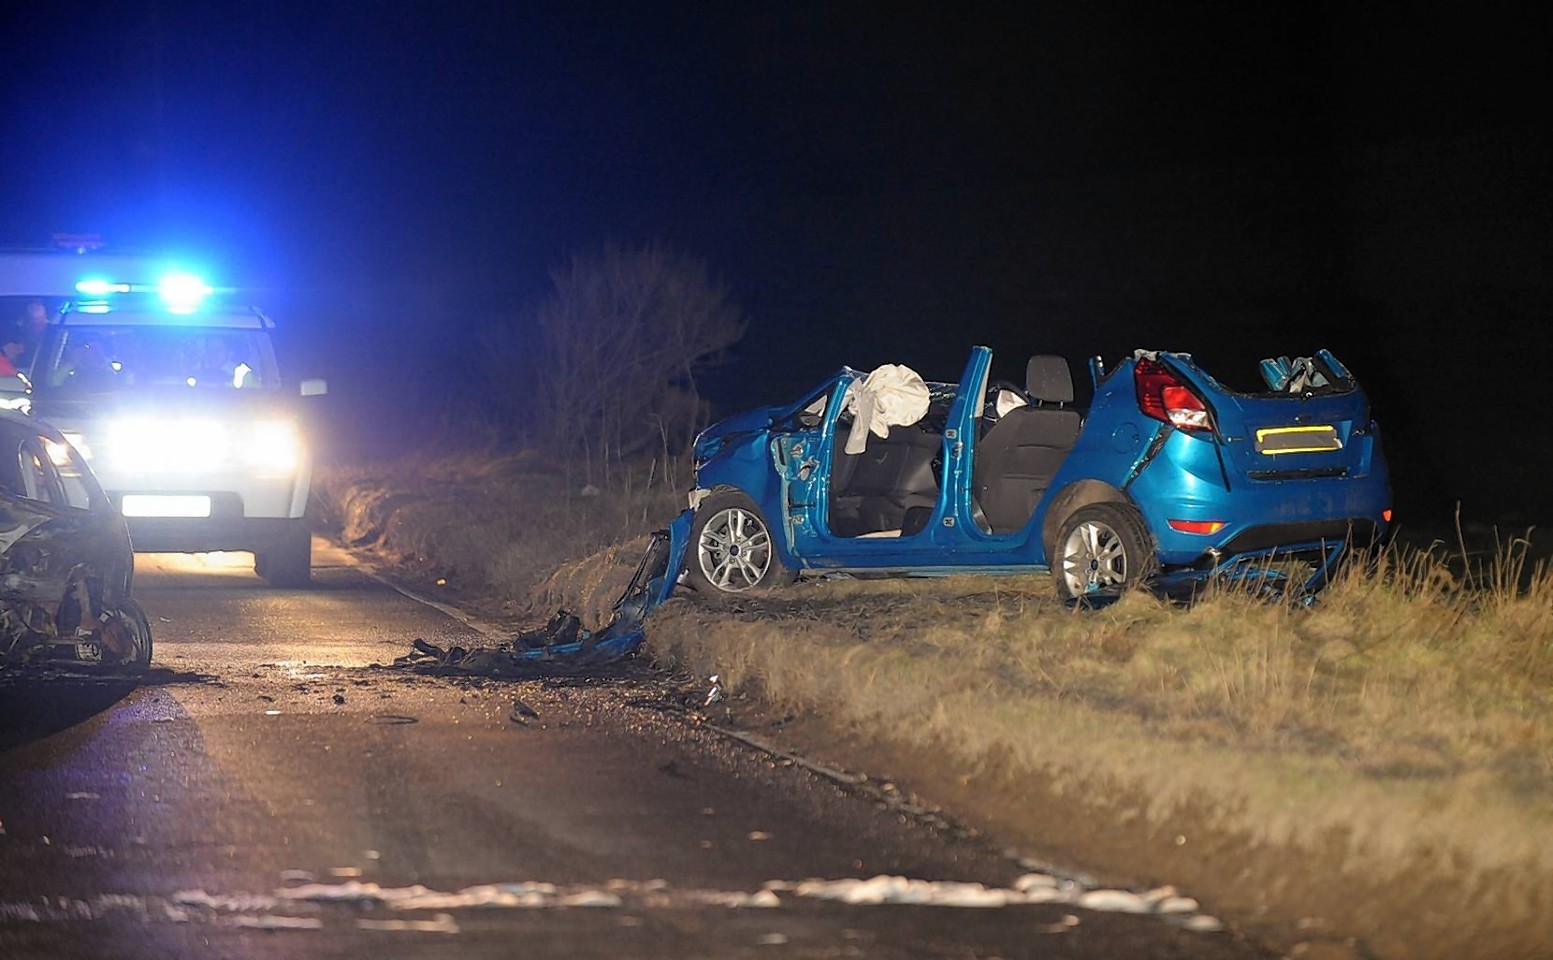 The Ka which caught fire at the scene of the crash on the South Deeside Road last night